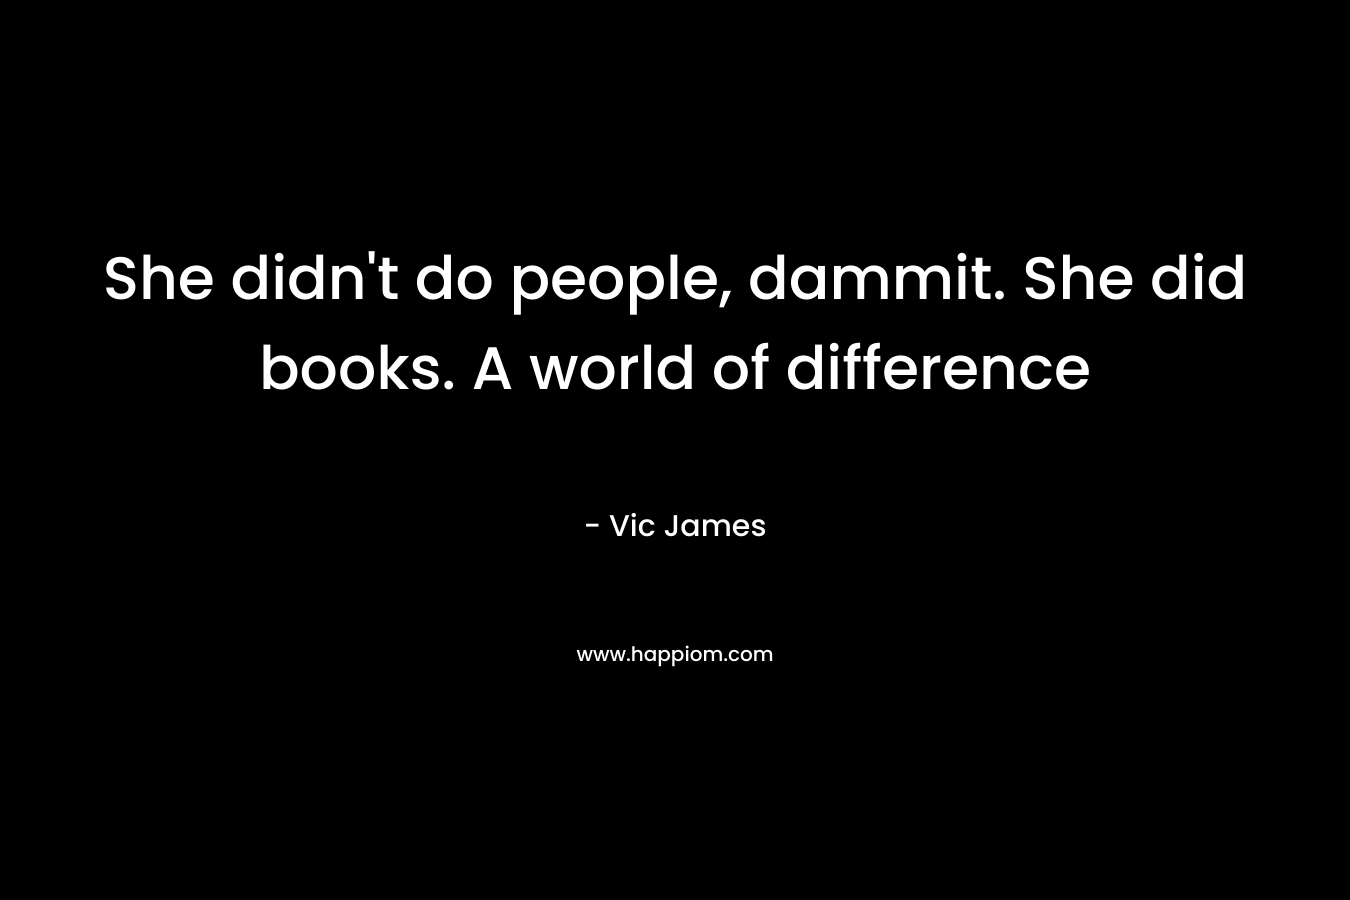 She didn't do people, dammit. She did books. A world of difference